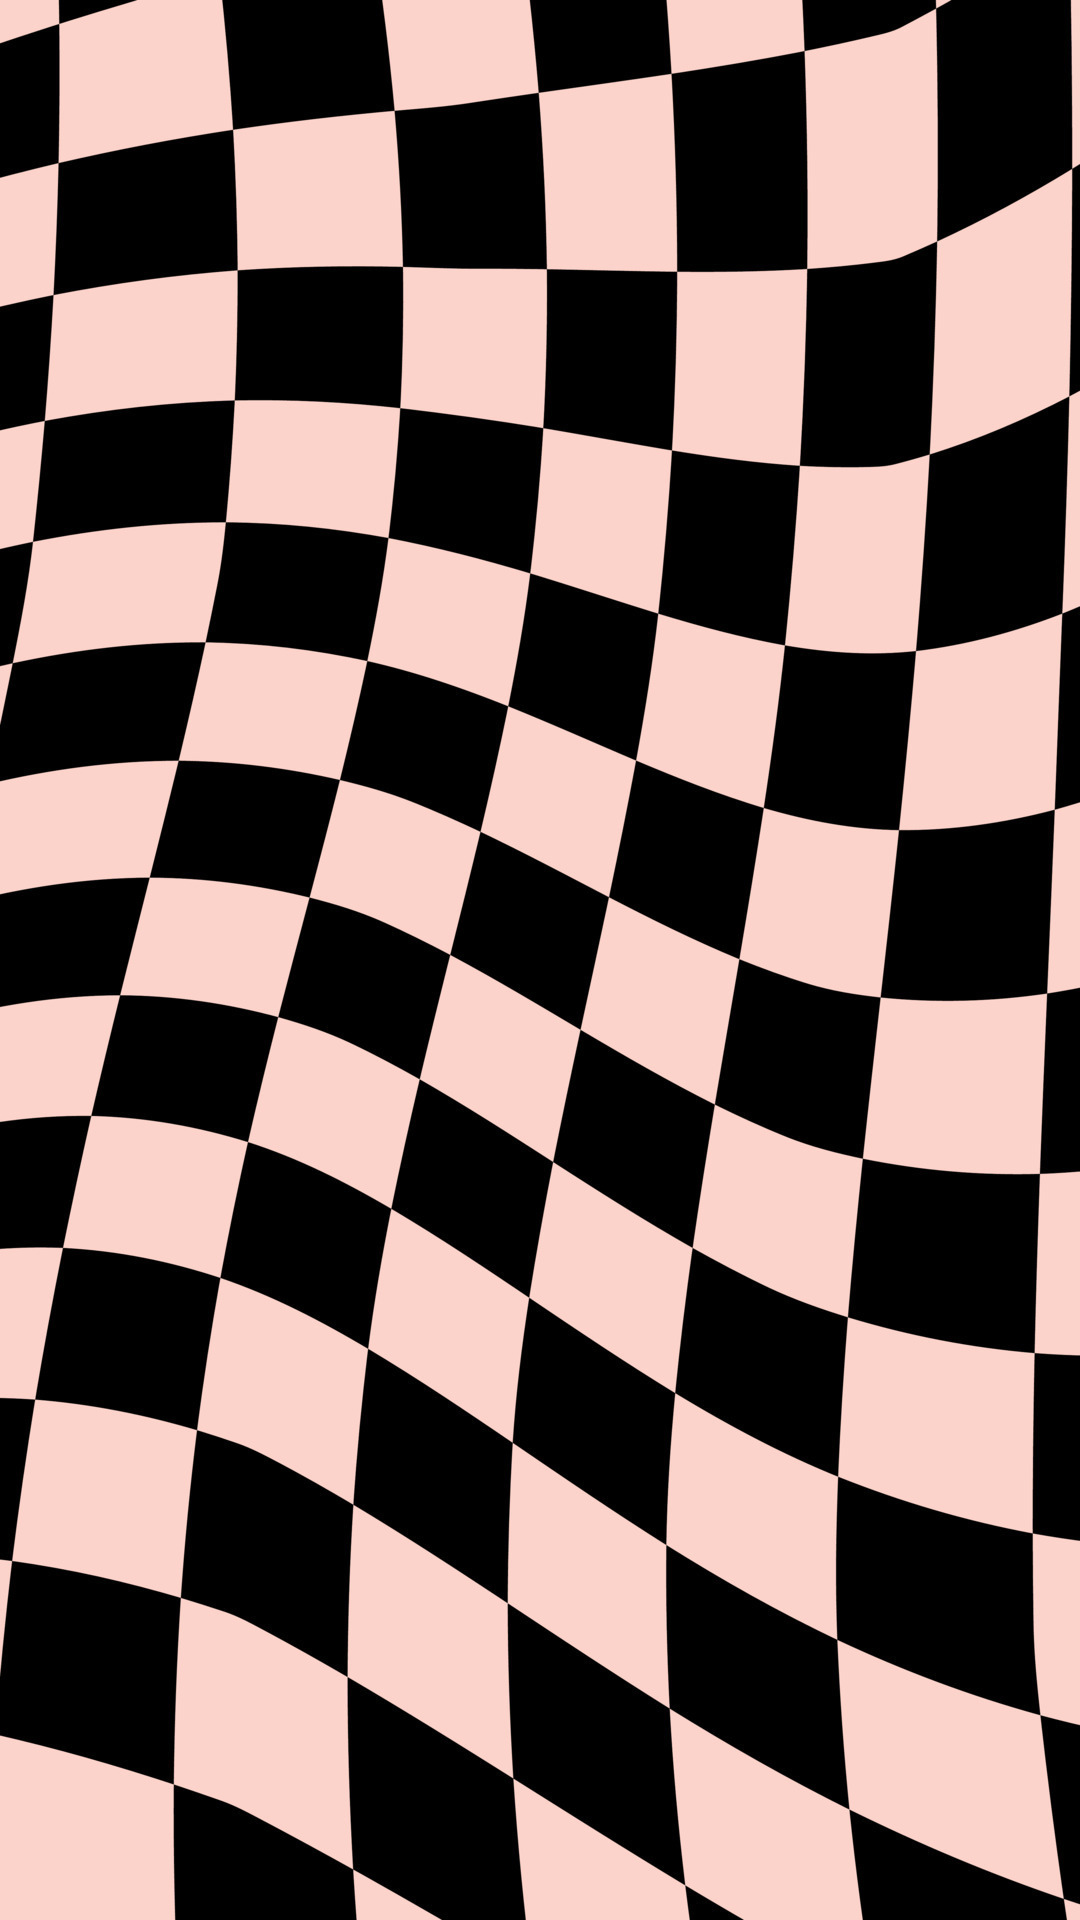 Background Checkers Chequered Checkered Squares Seamless Tileable Floral  Wh Iphone Cute Pink Iphone IPhone Tumblr Aesthetic HD phone wallpaper   Pxfuel